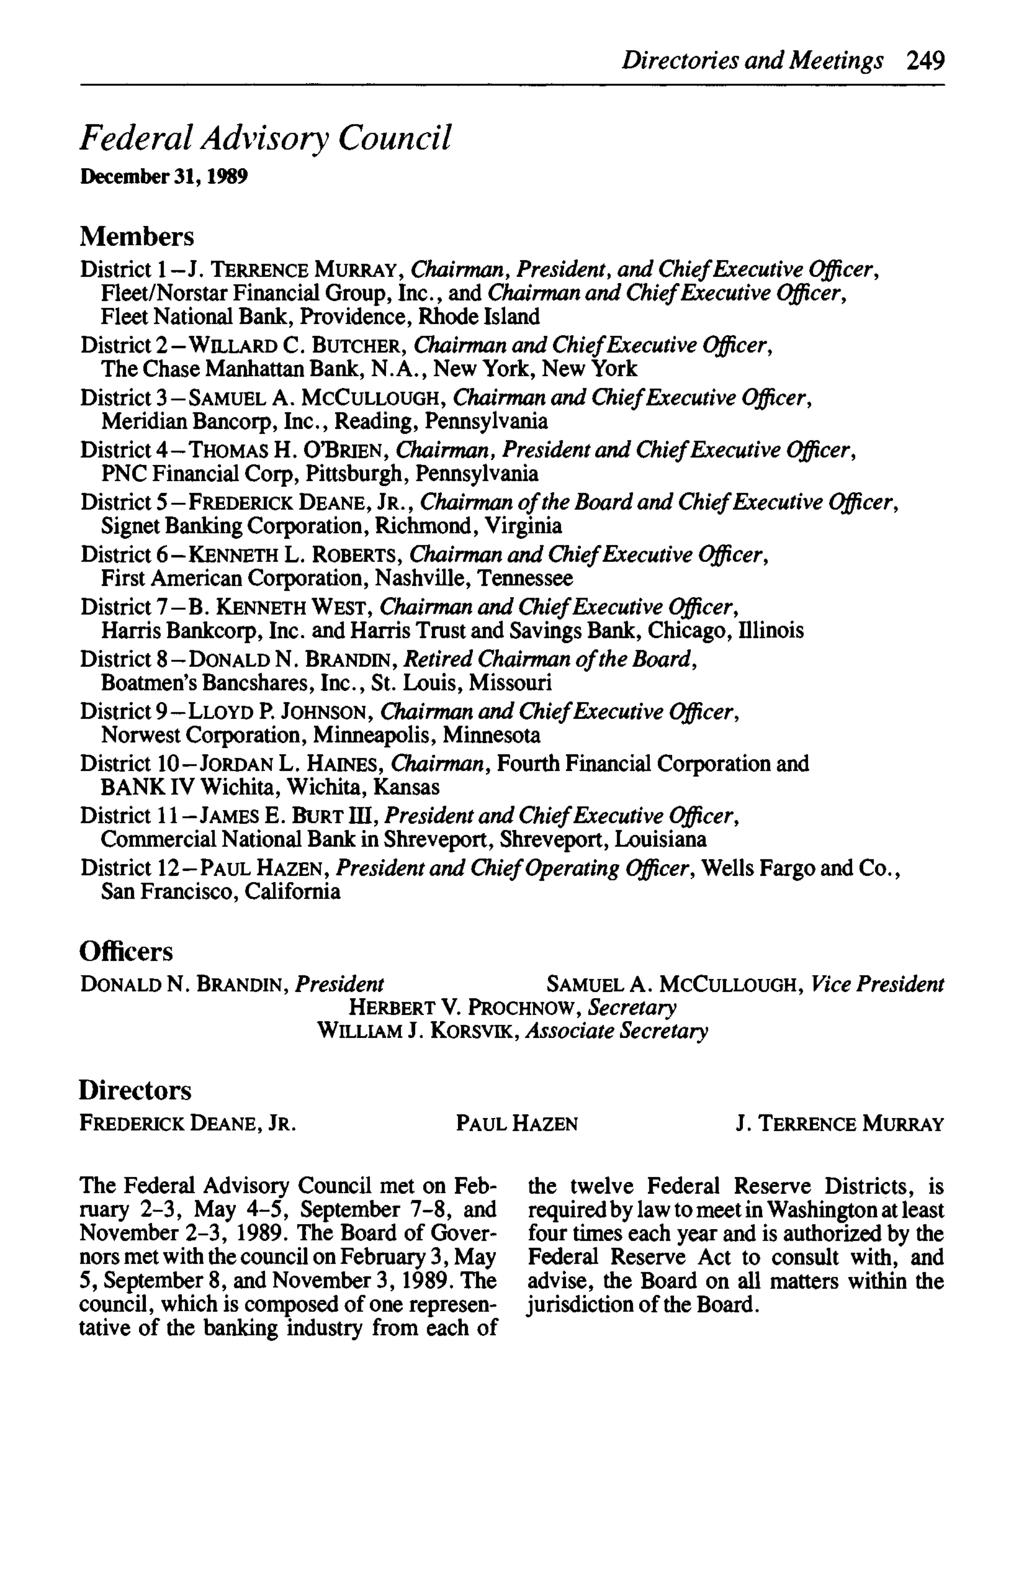 1989 Directories and Meetings 249 December 31,1989 District 1 - J. TERRENCE MURRAY, Chairman, President, and Chief Executive Officer, Fleet/Norstar Financial Group, Inc.